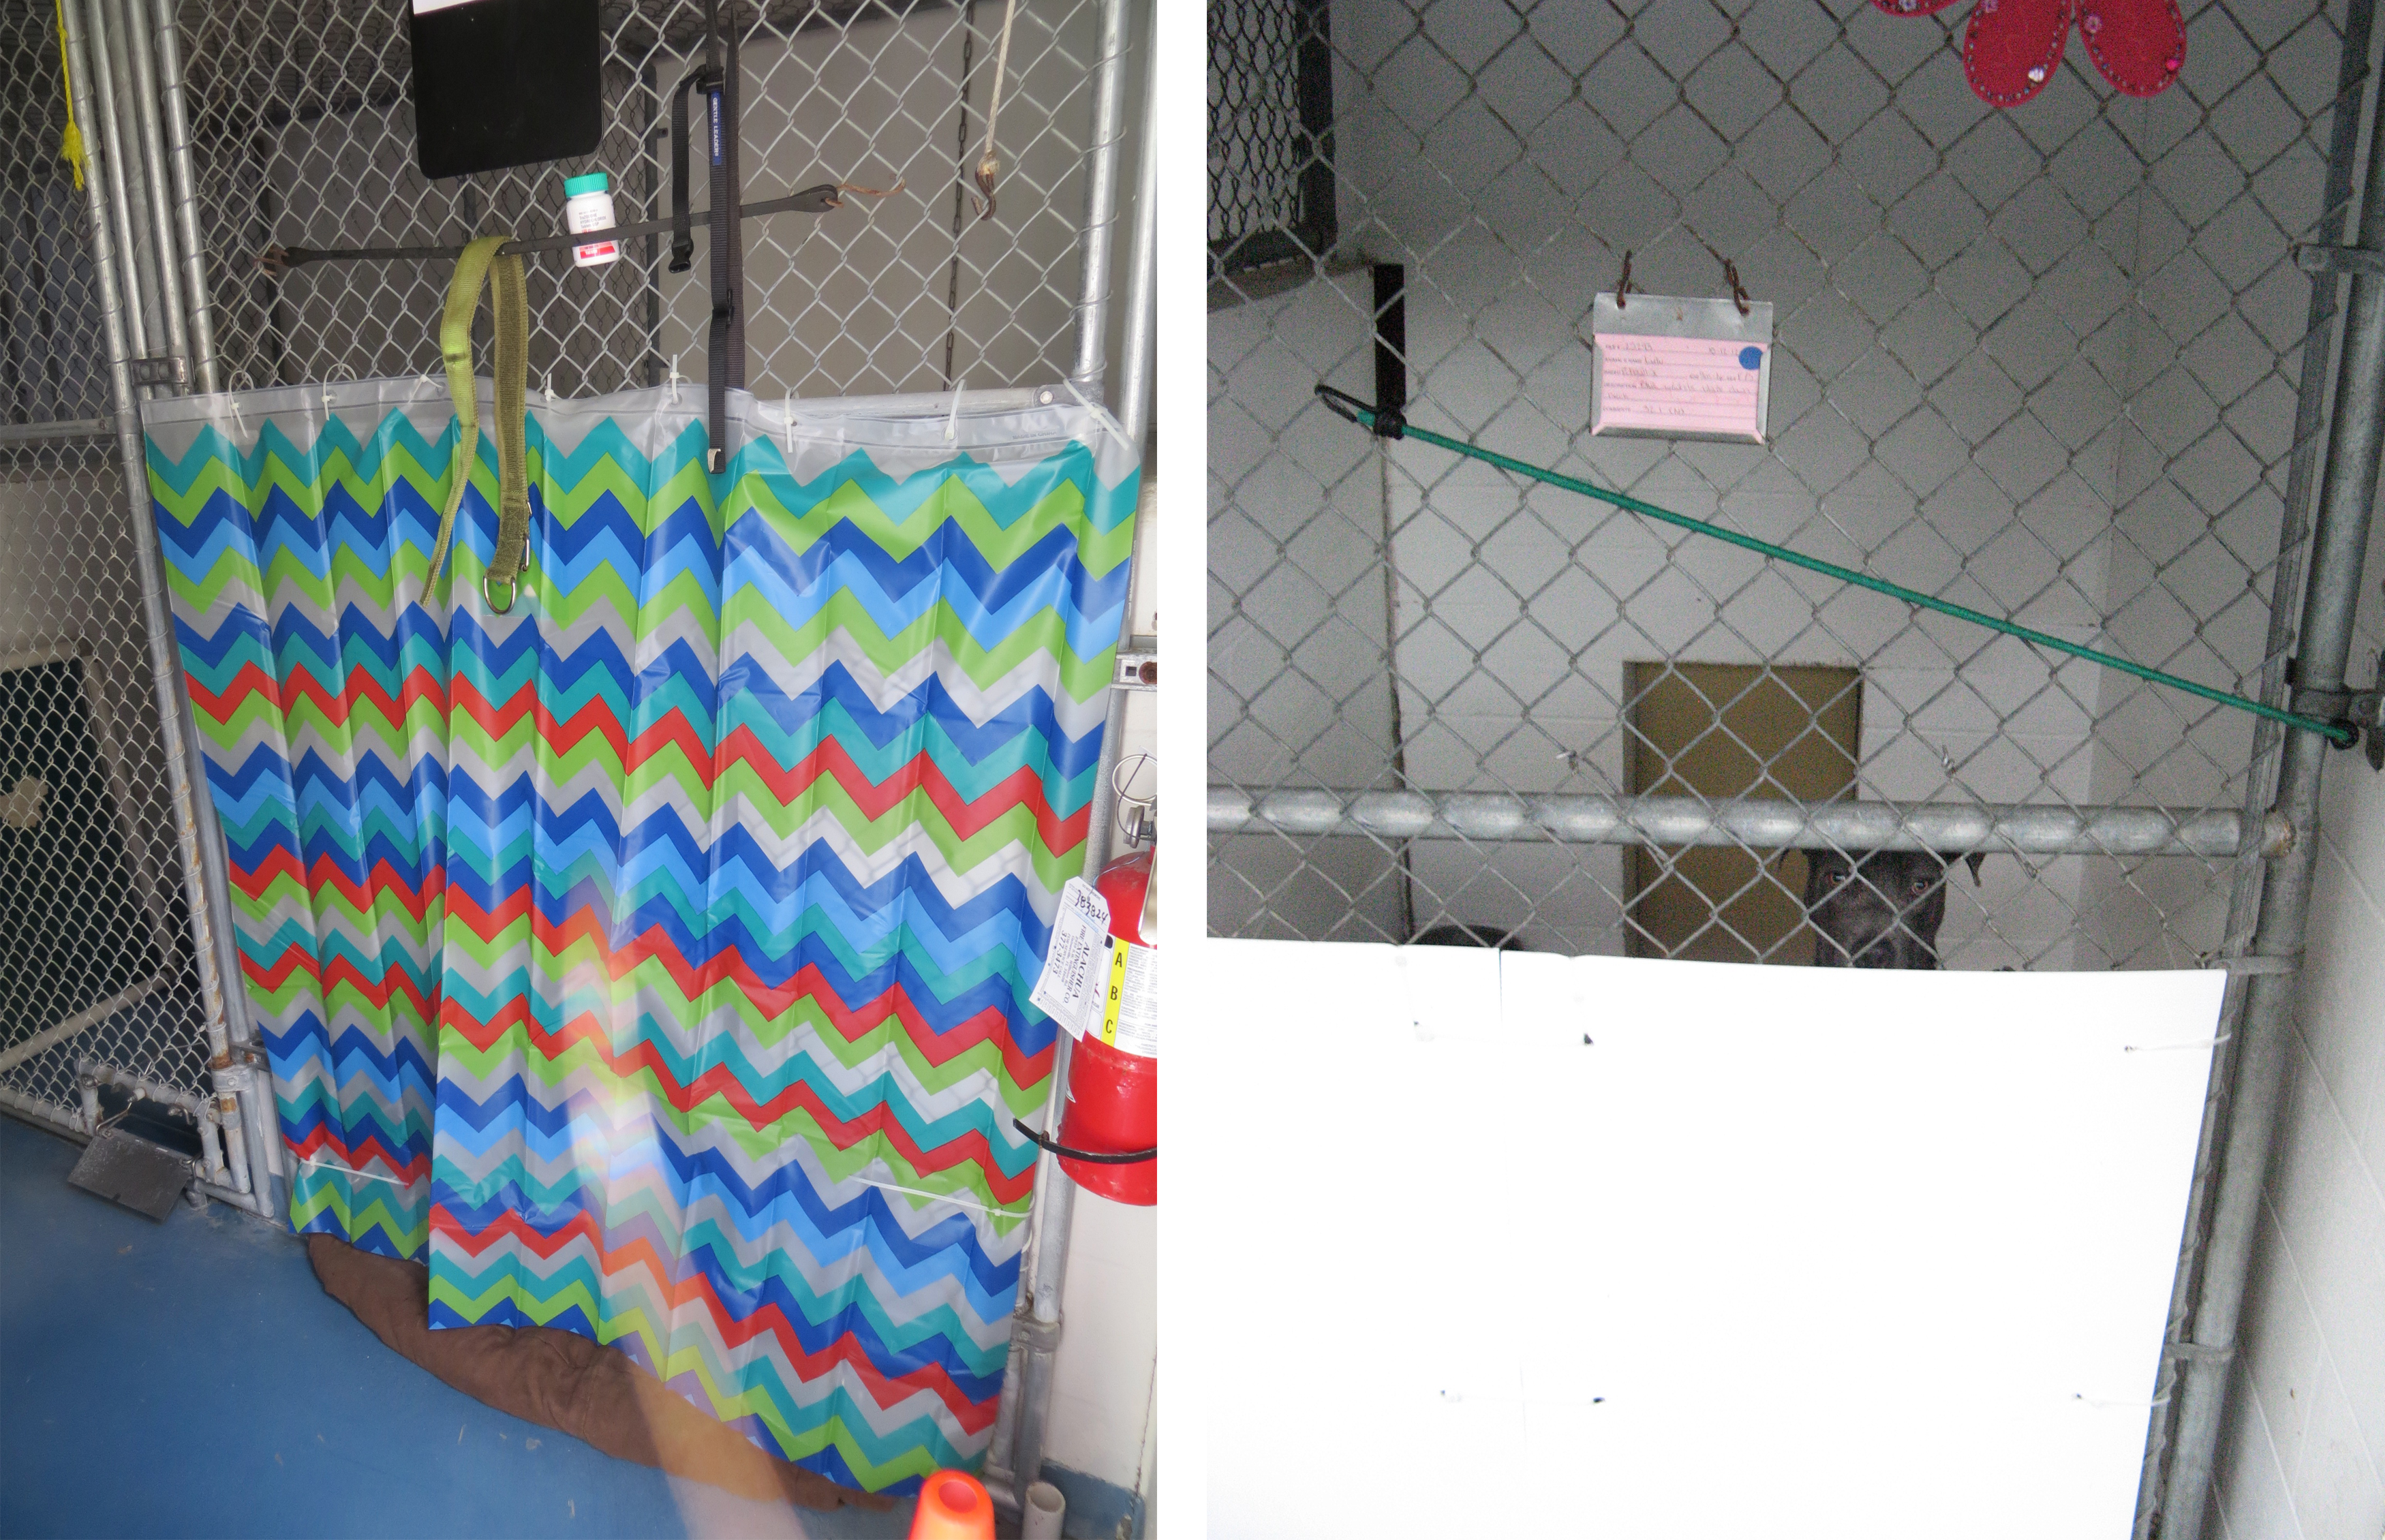 Photo on left: shower curtain attached to bottom half of chain link run. Photo on right: white sign board attached to bottom half of chain link run with dog looking out over it.